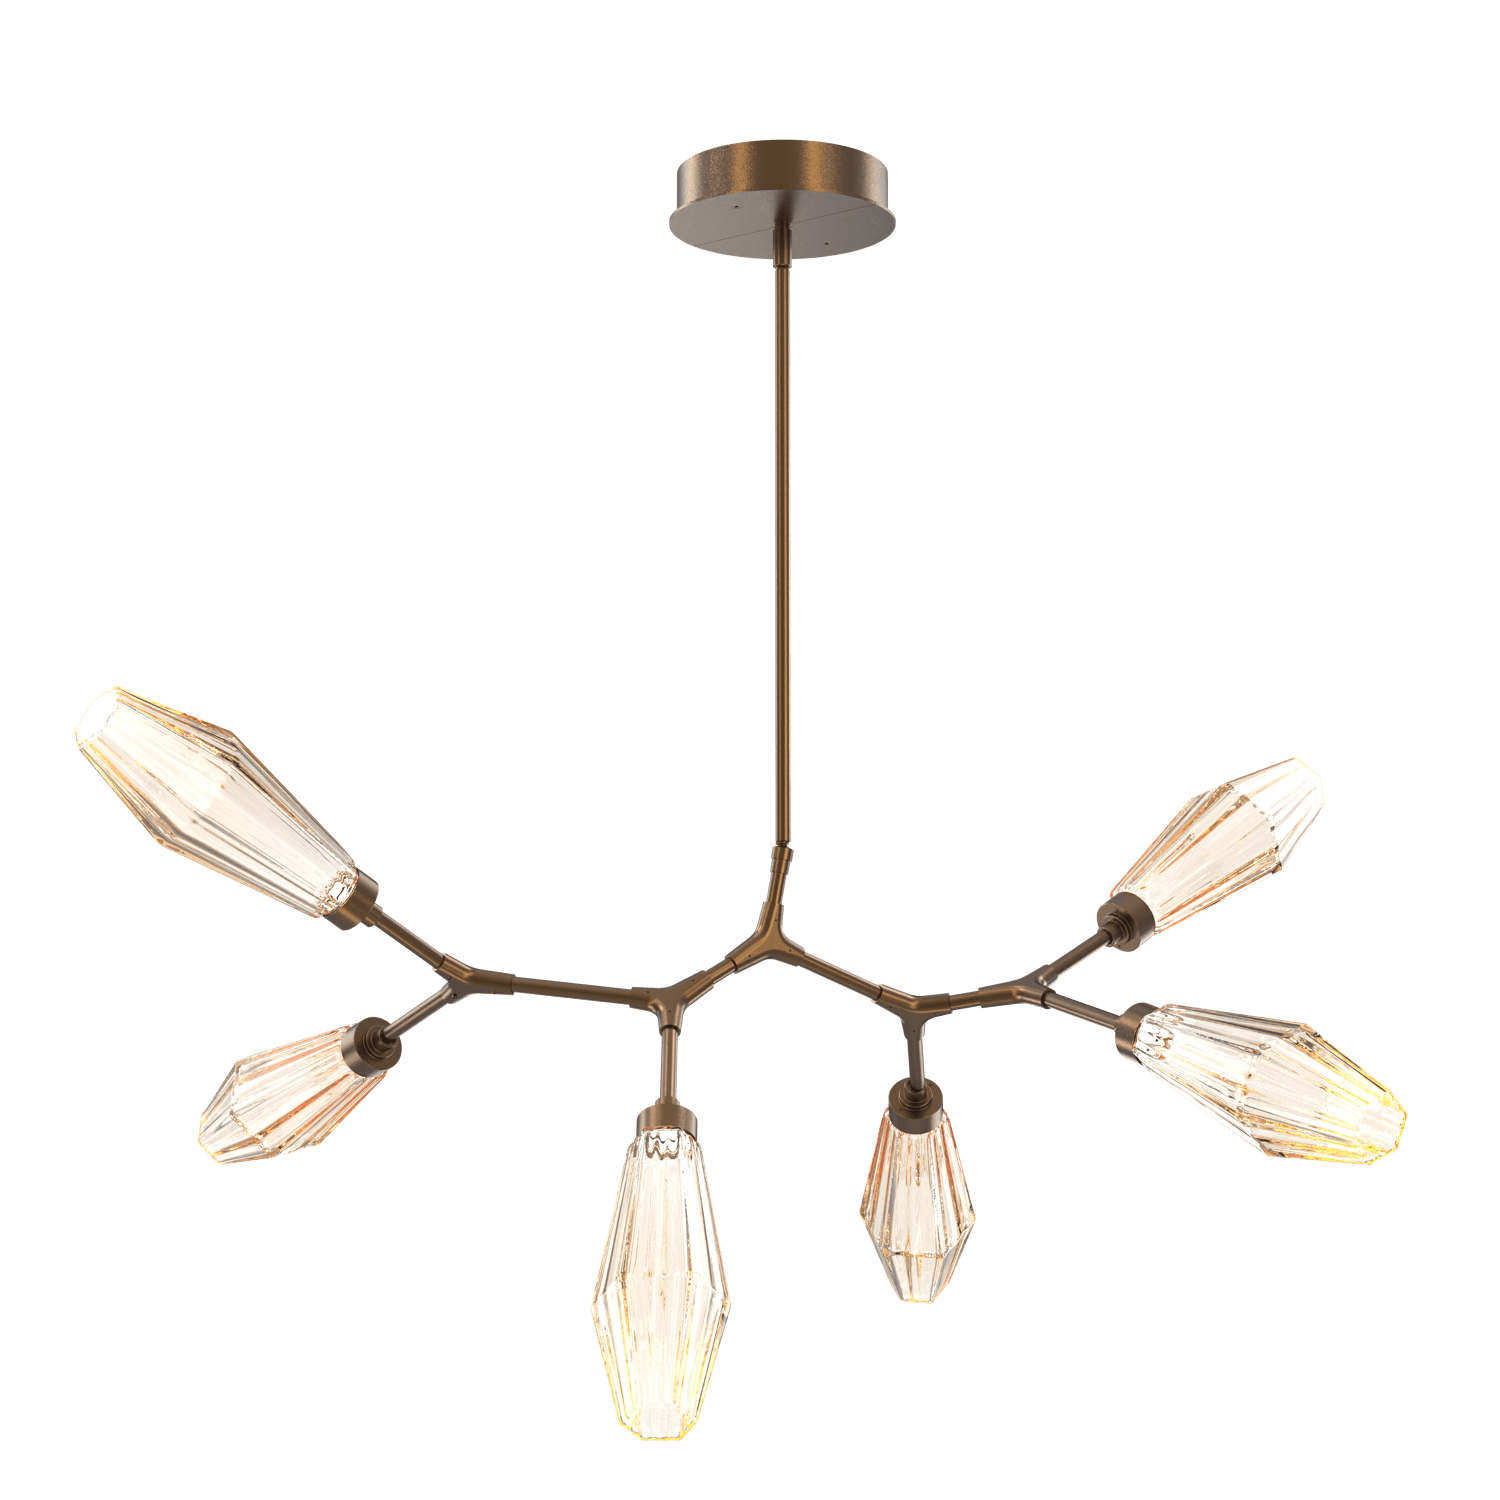 PLB0049-BA-FB-RA-Hammerton-Studio-Aalto-6-light-modern-branch-chandelier-with-flat-bronze-finish-and-optic-ribbed-amber-glass-shades-and-LED-lamping